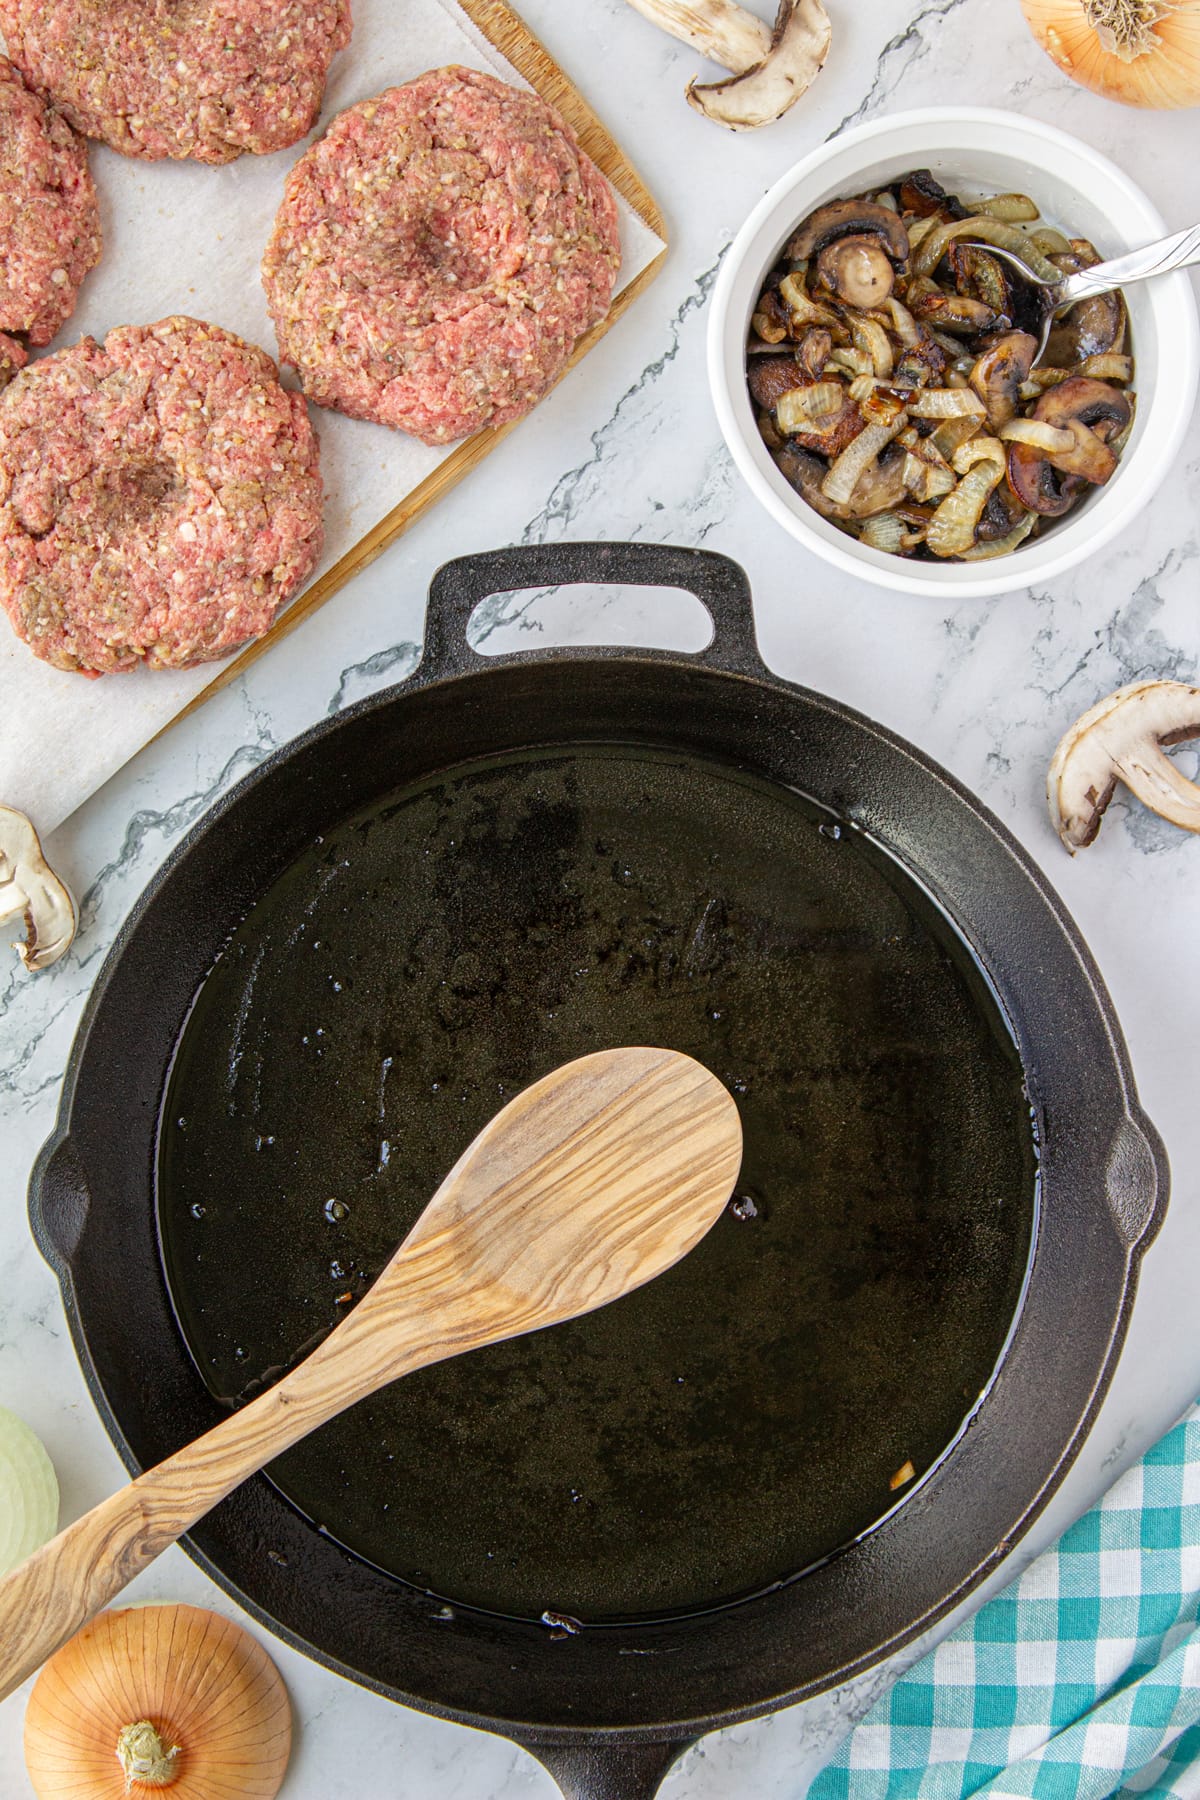 A greased pan next to four steak patties and a bowl of mushrooms and onions.